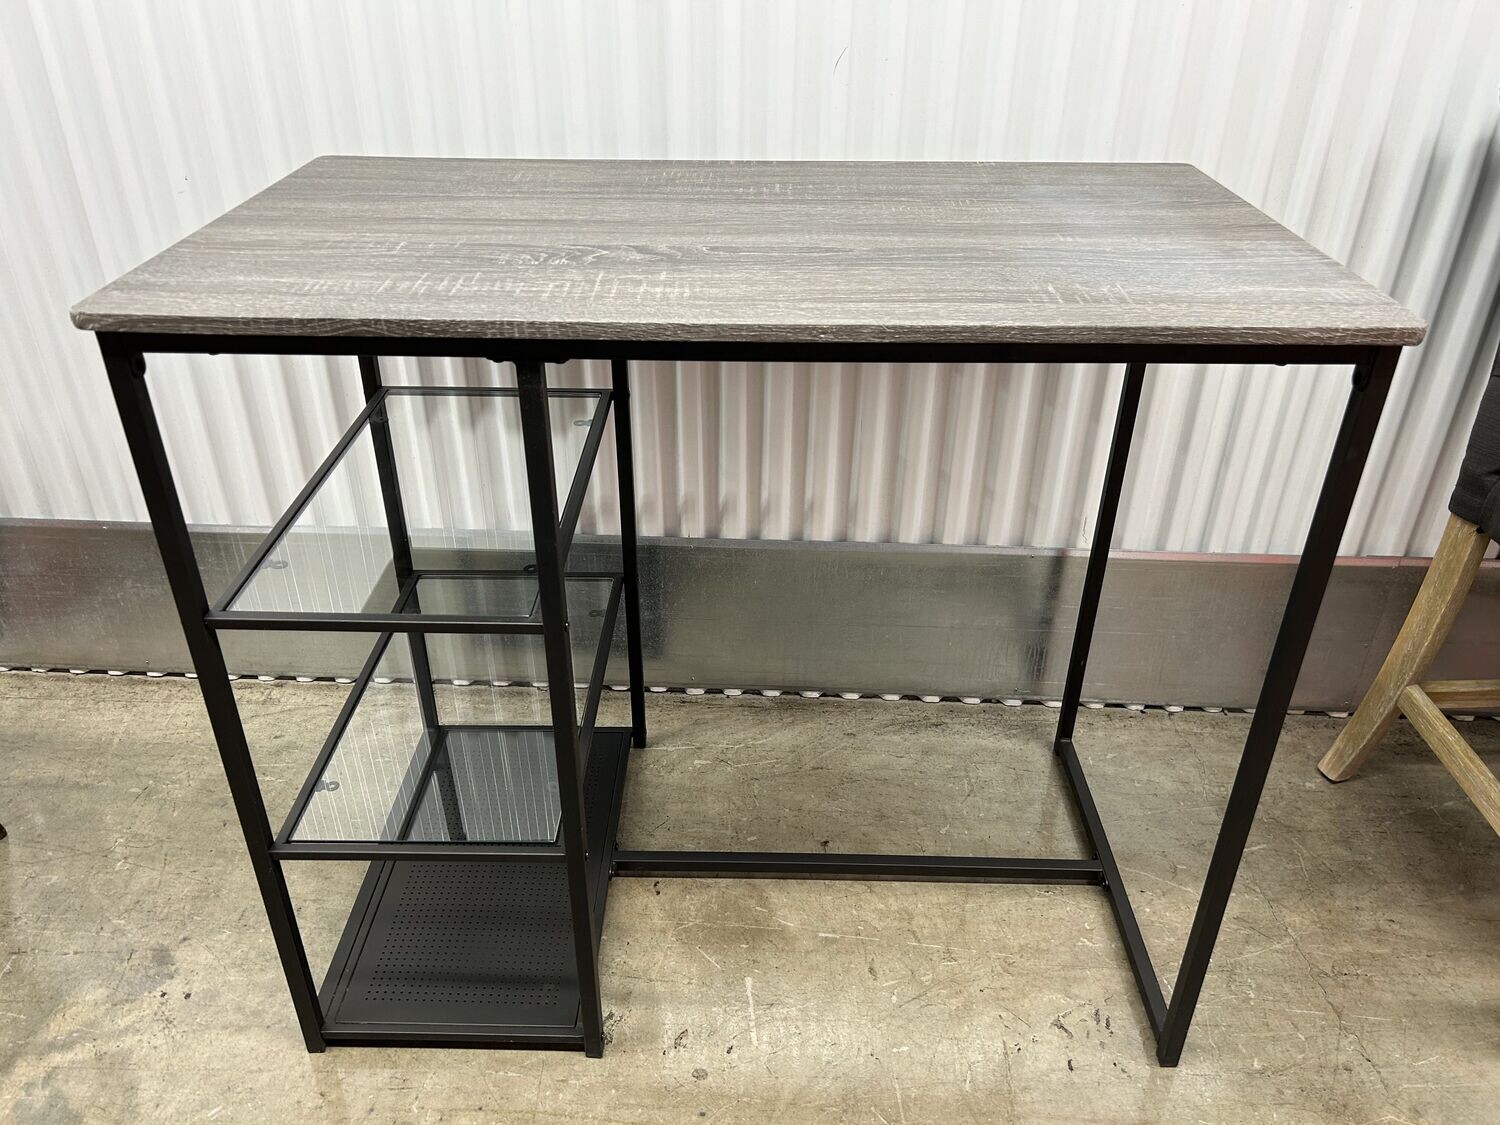 Counter-height Table / Kitchen Island / Desk #2103